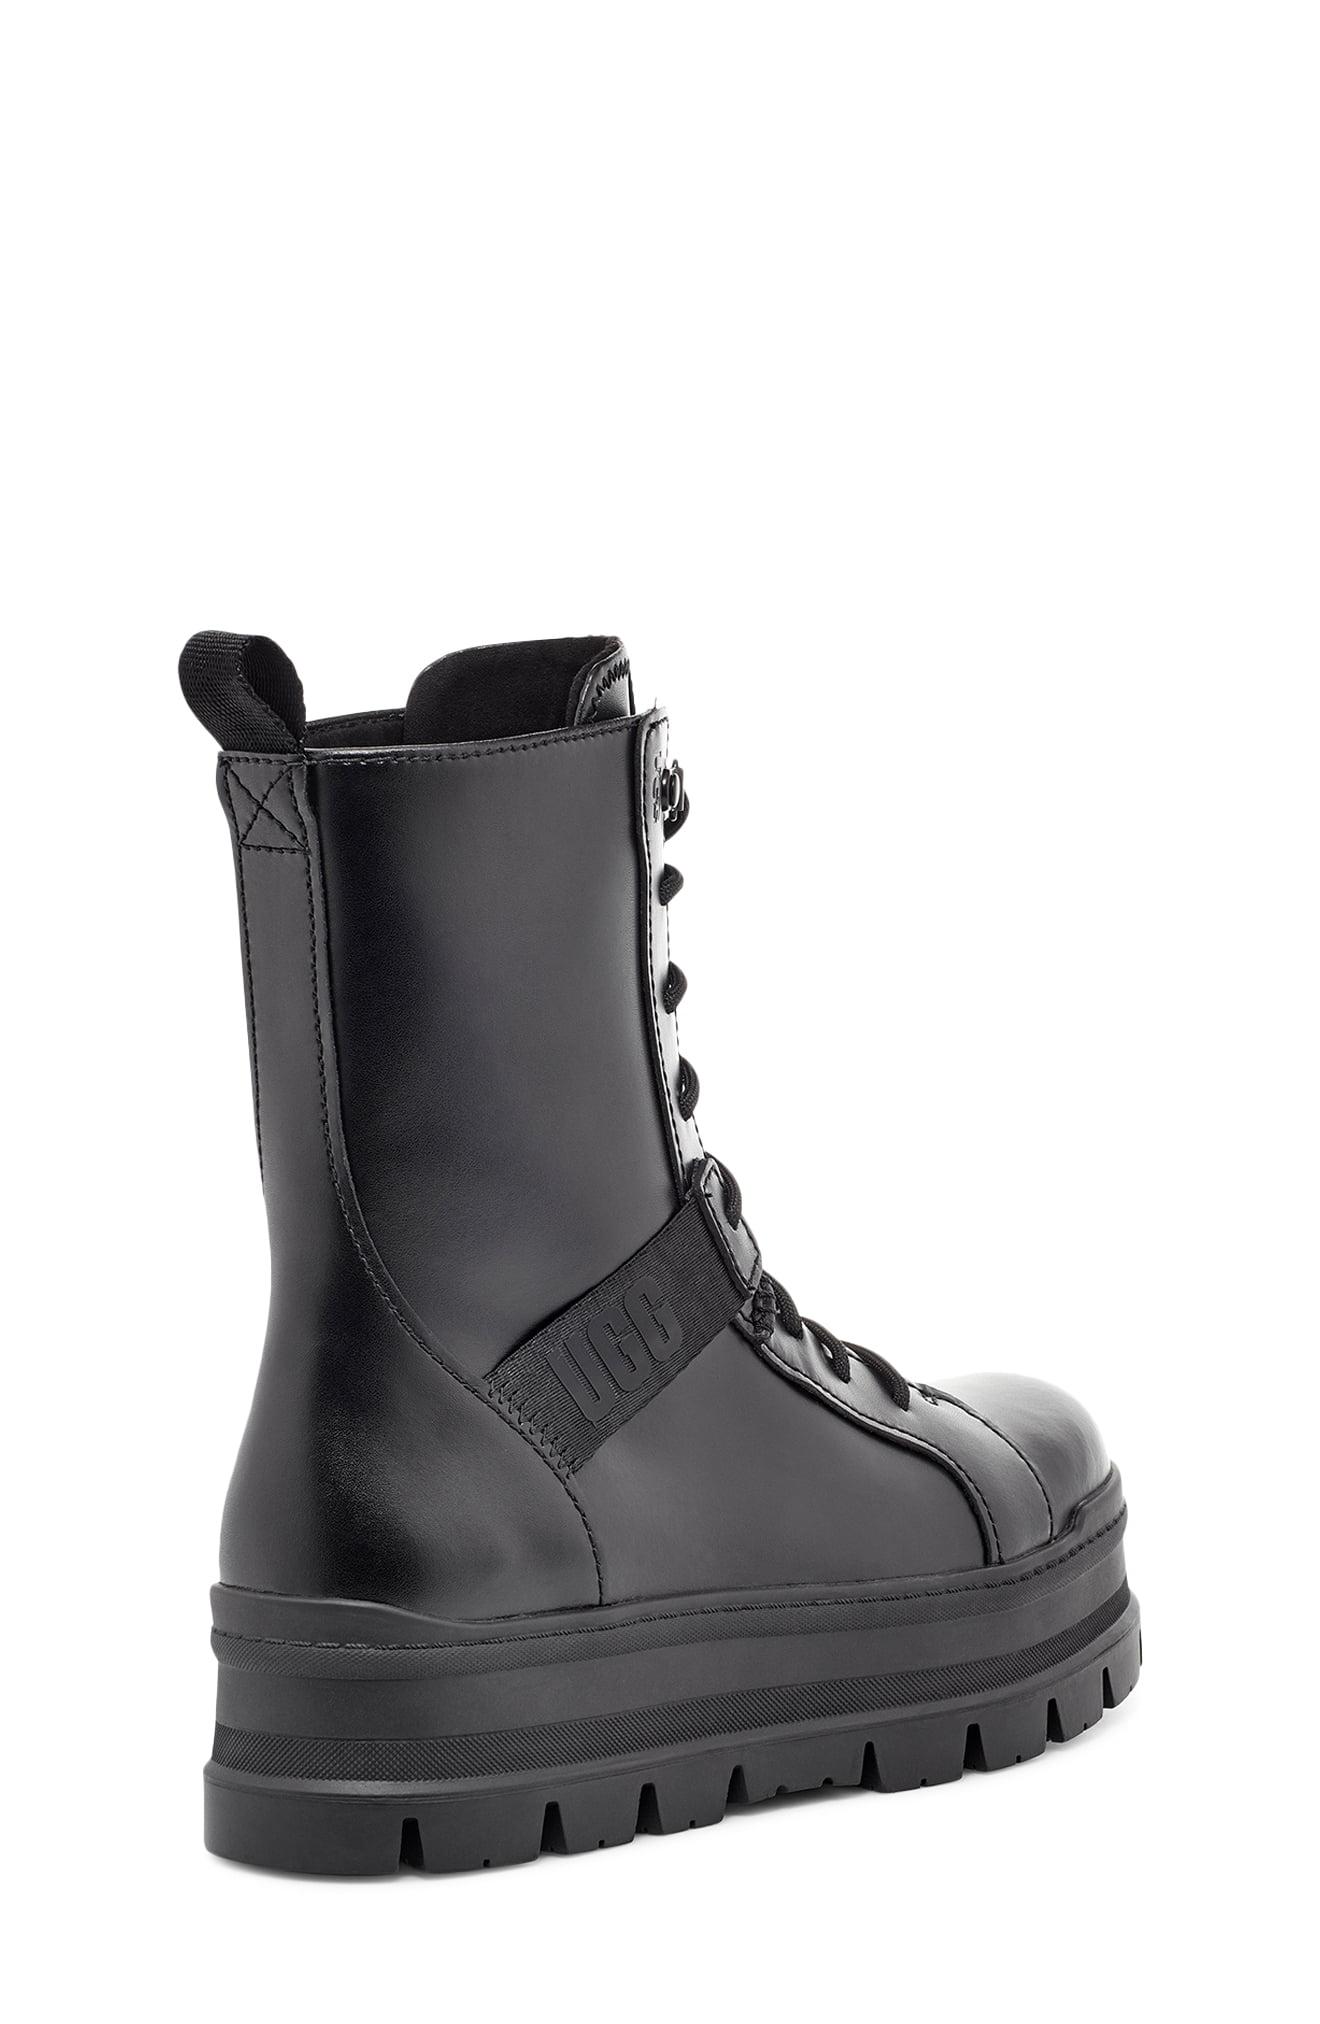 UGG Wool UGG Sheena Lace-up Boot in Black Leather (Black) - Lyst